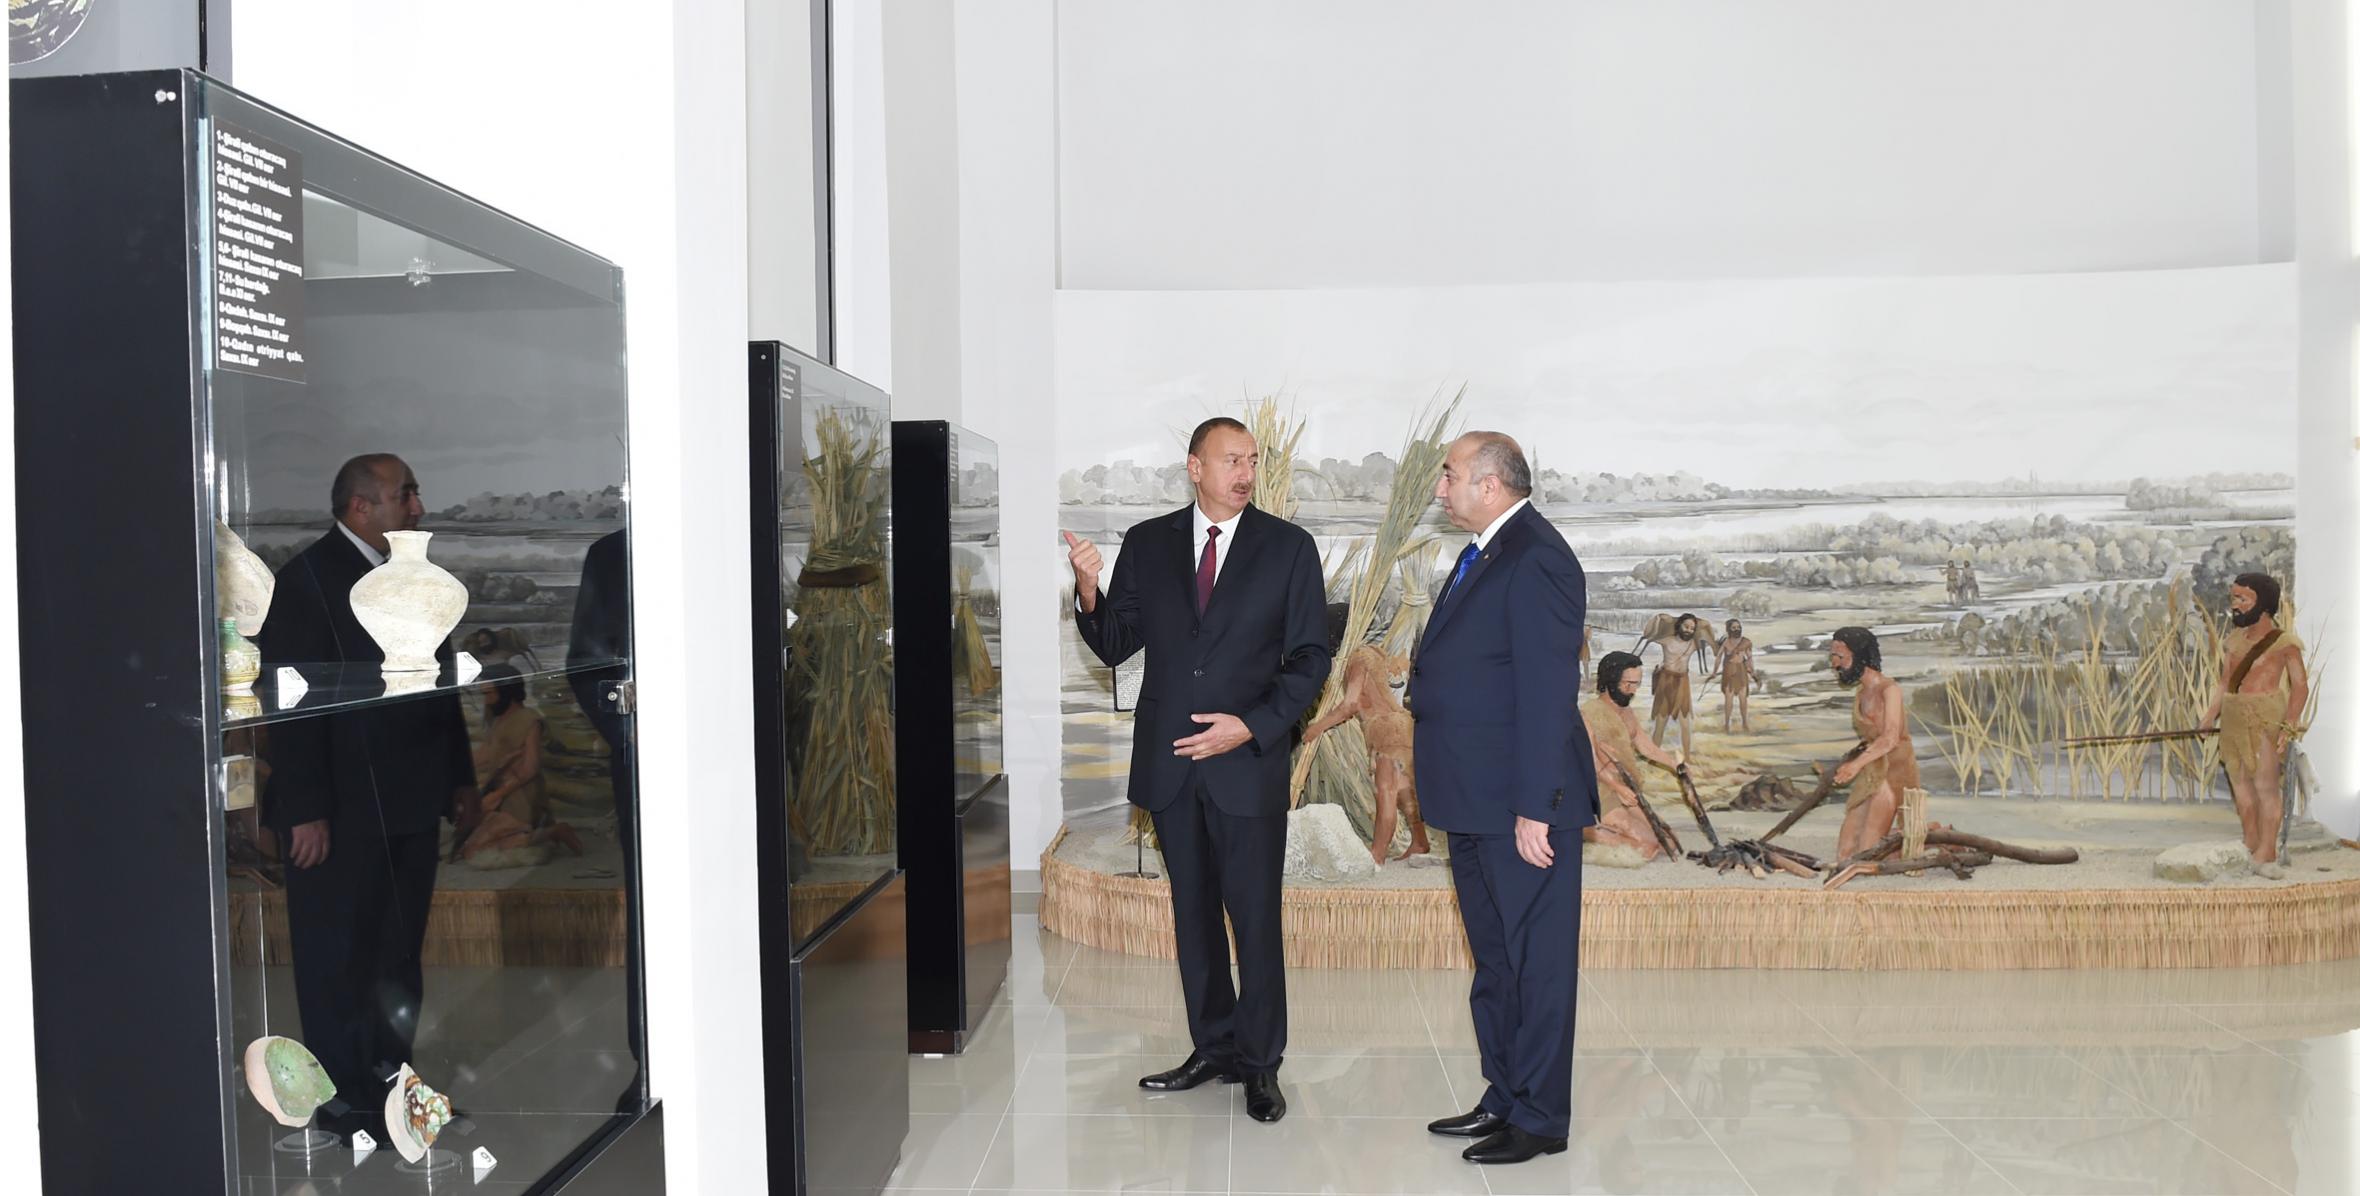 Ilham Aliyev reviewed the Museum of History and Local Lore in Kurdamir after a major overhaul